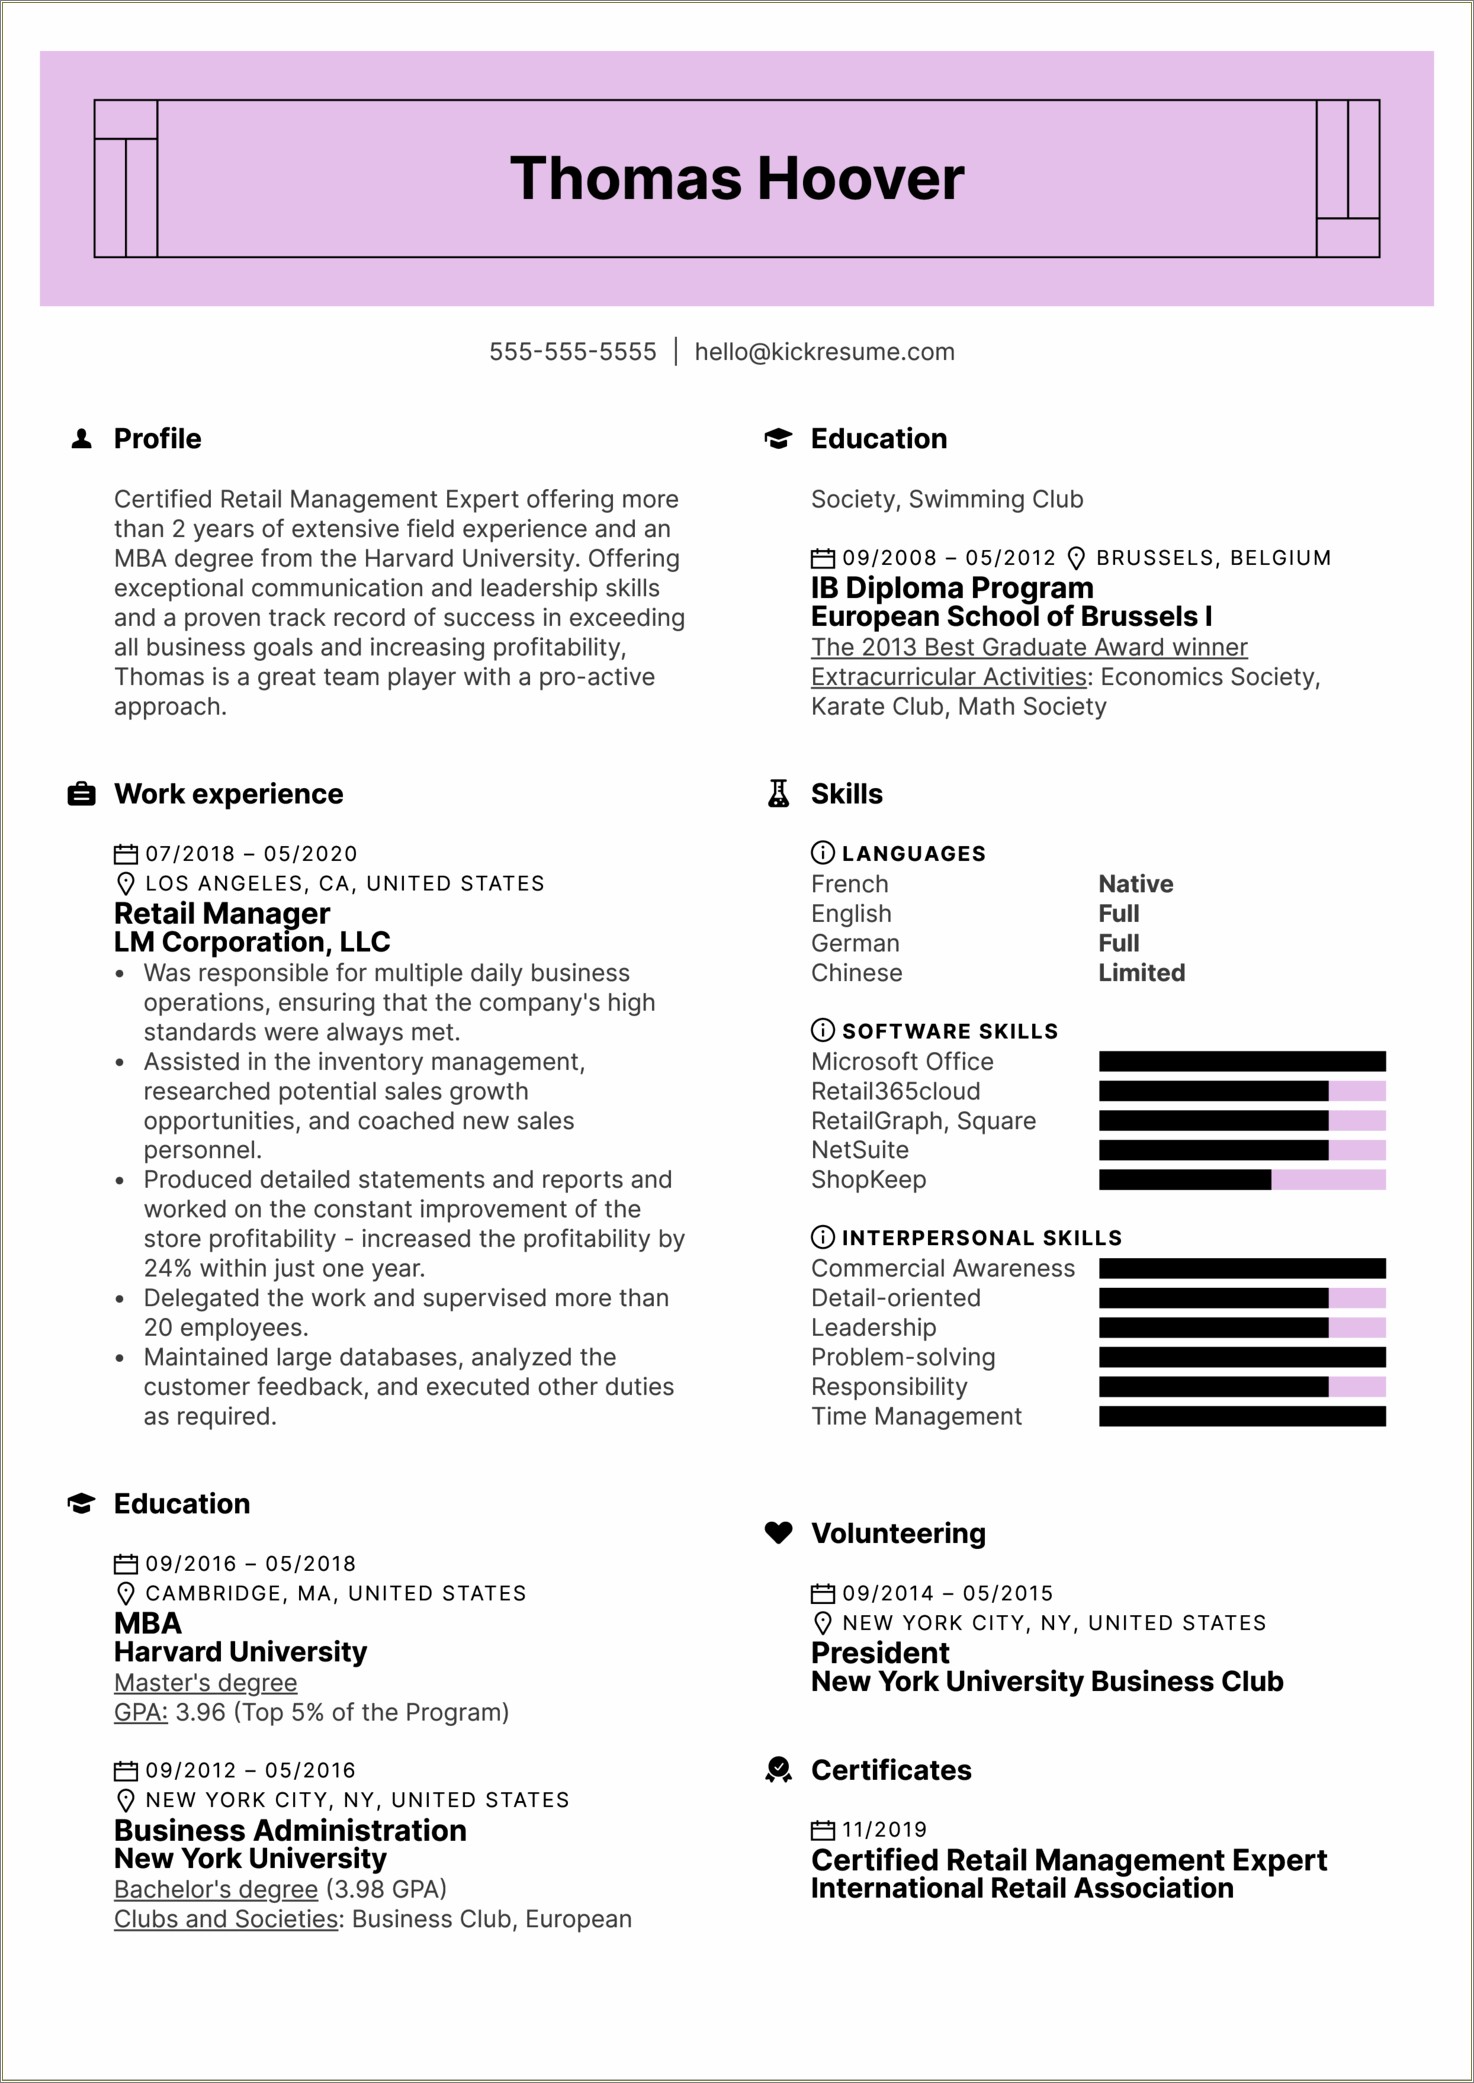 Resume Summary For Retail Management And Customer Service